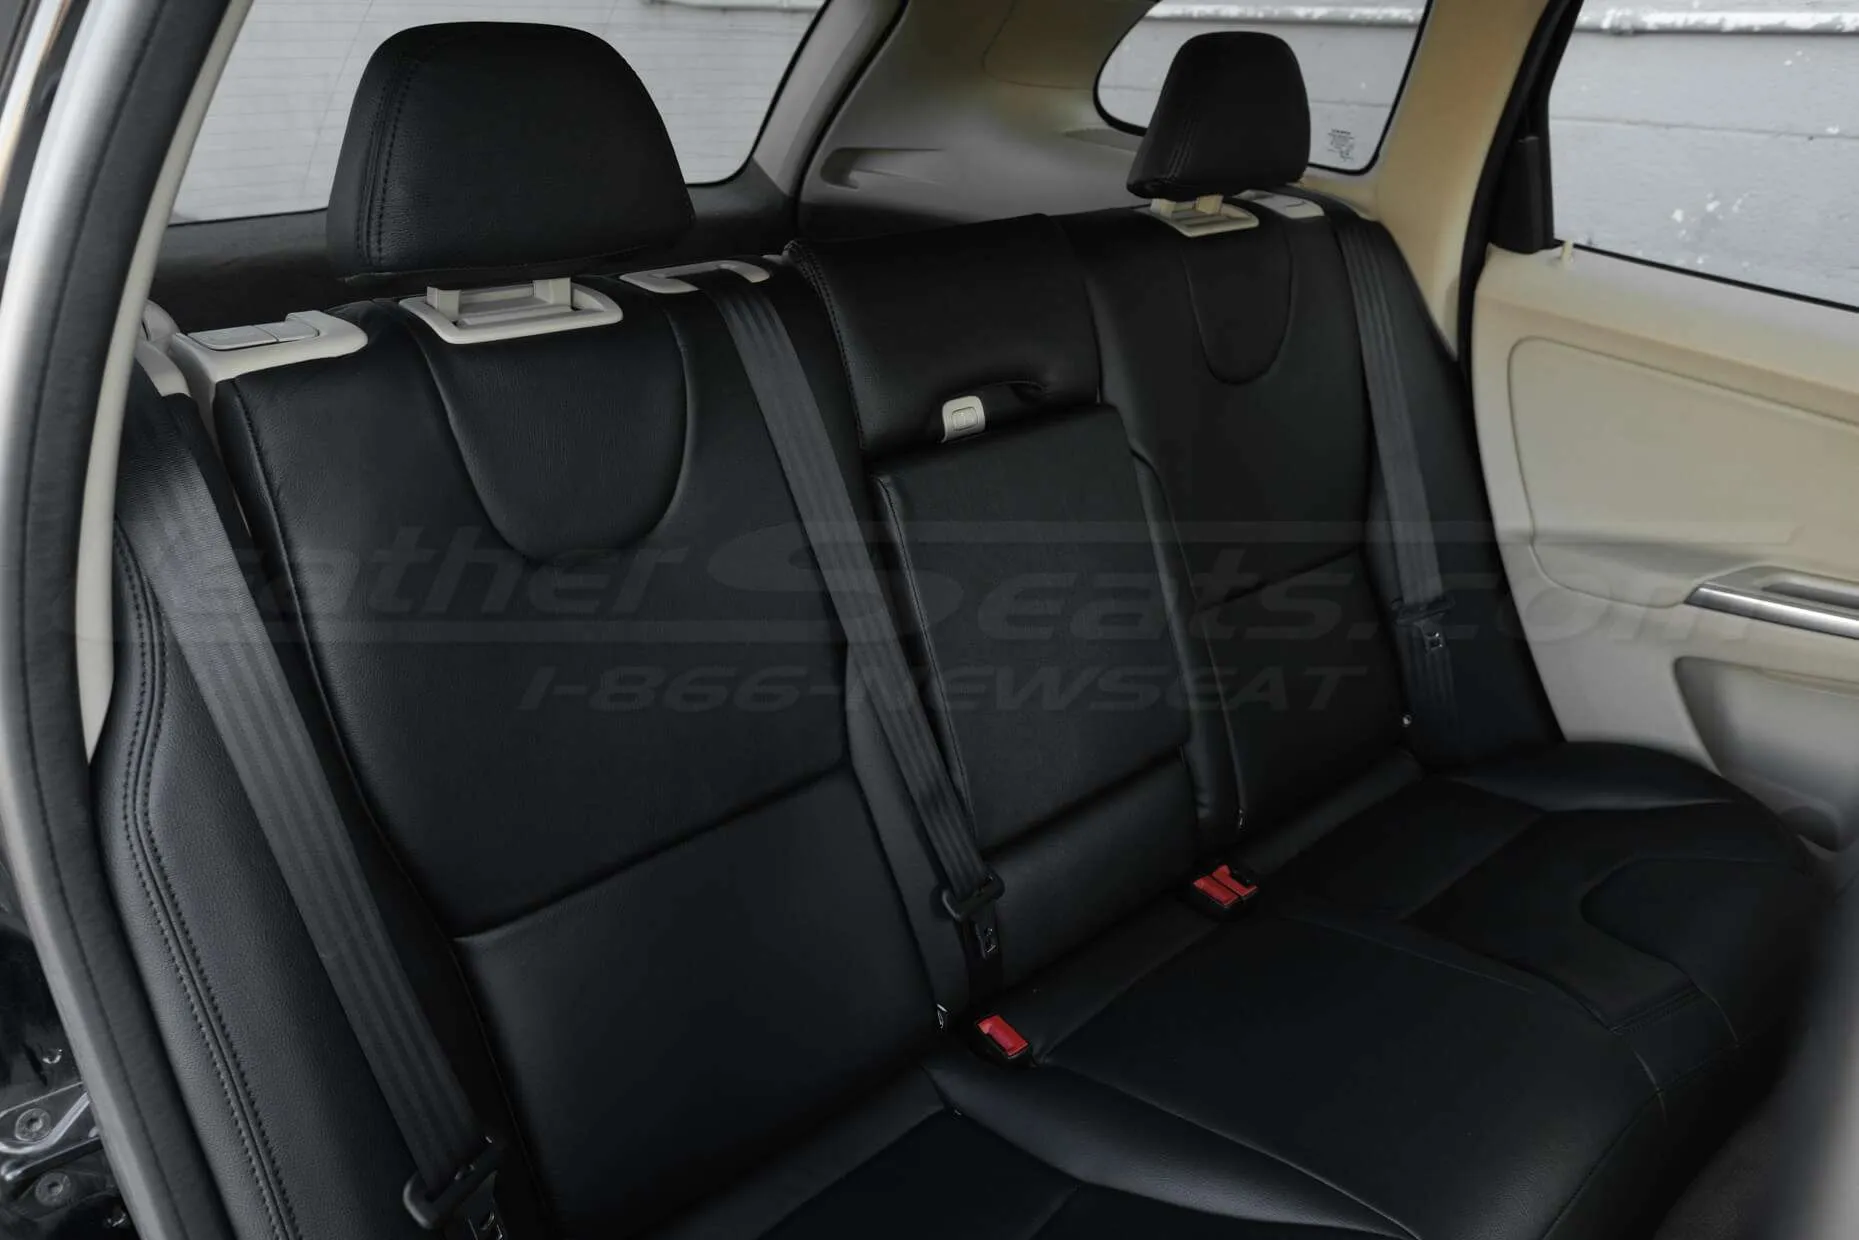 Alternative view of rear leather seats from passenger side